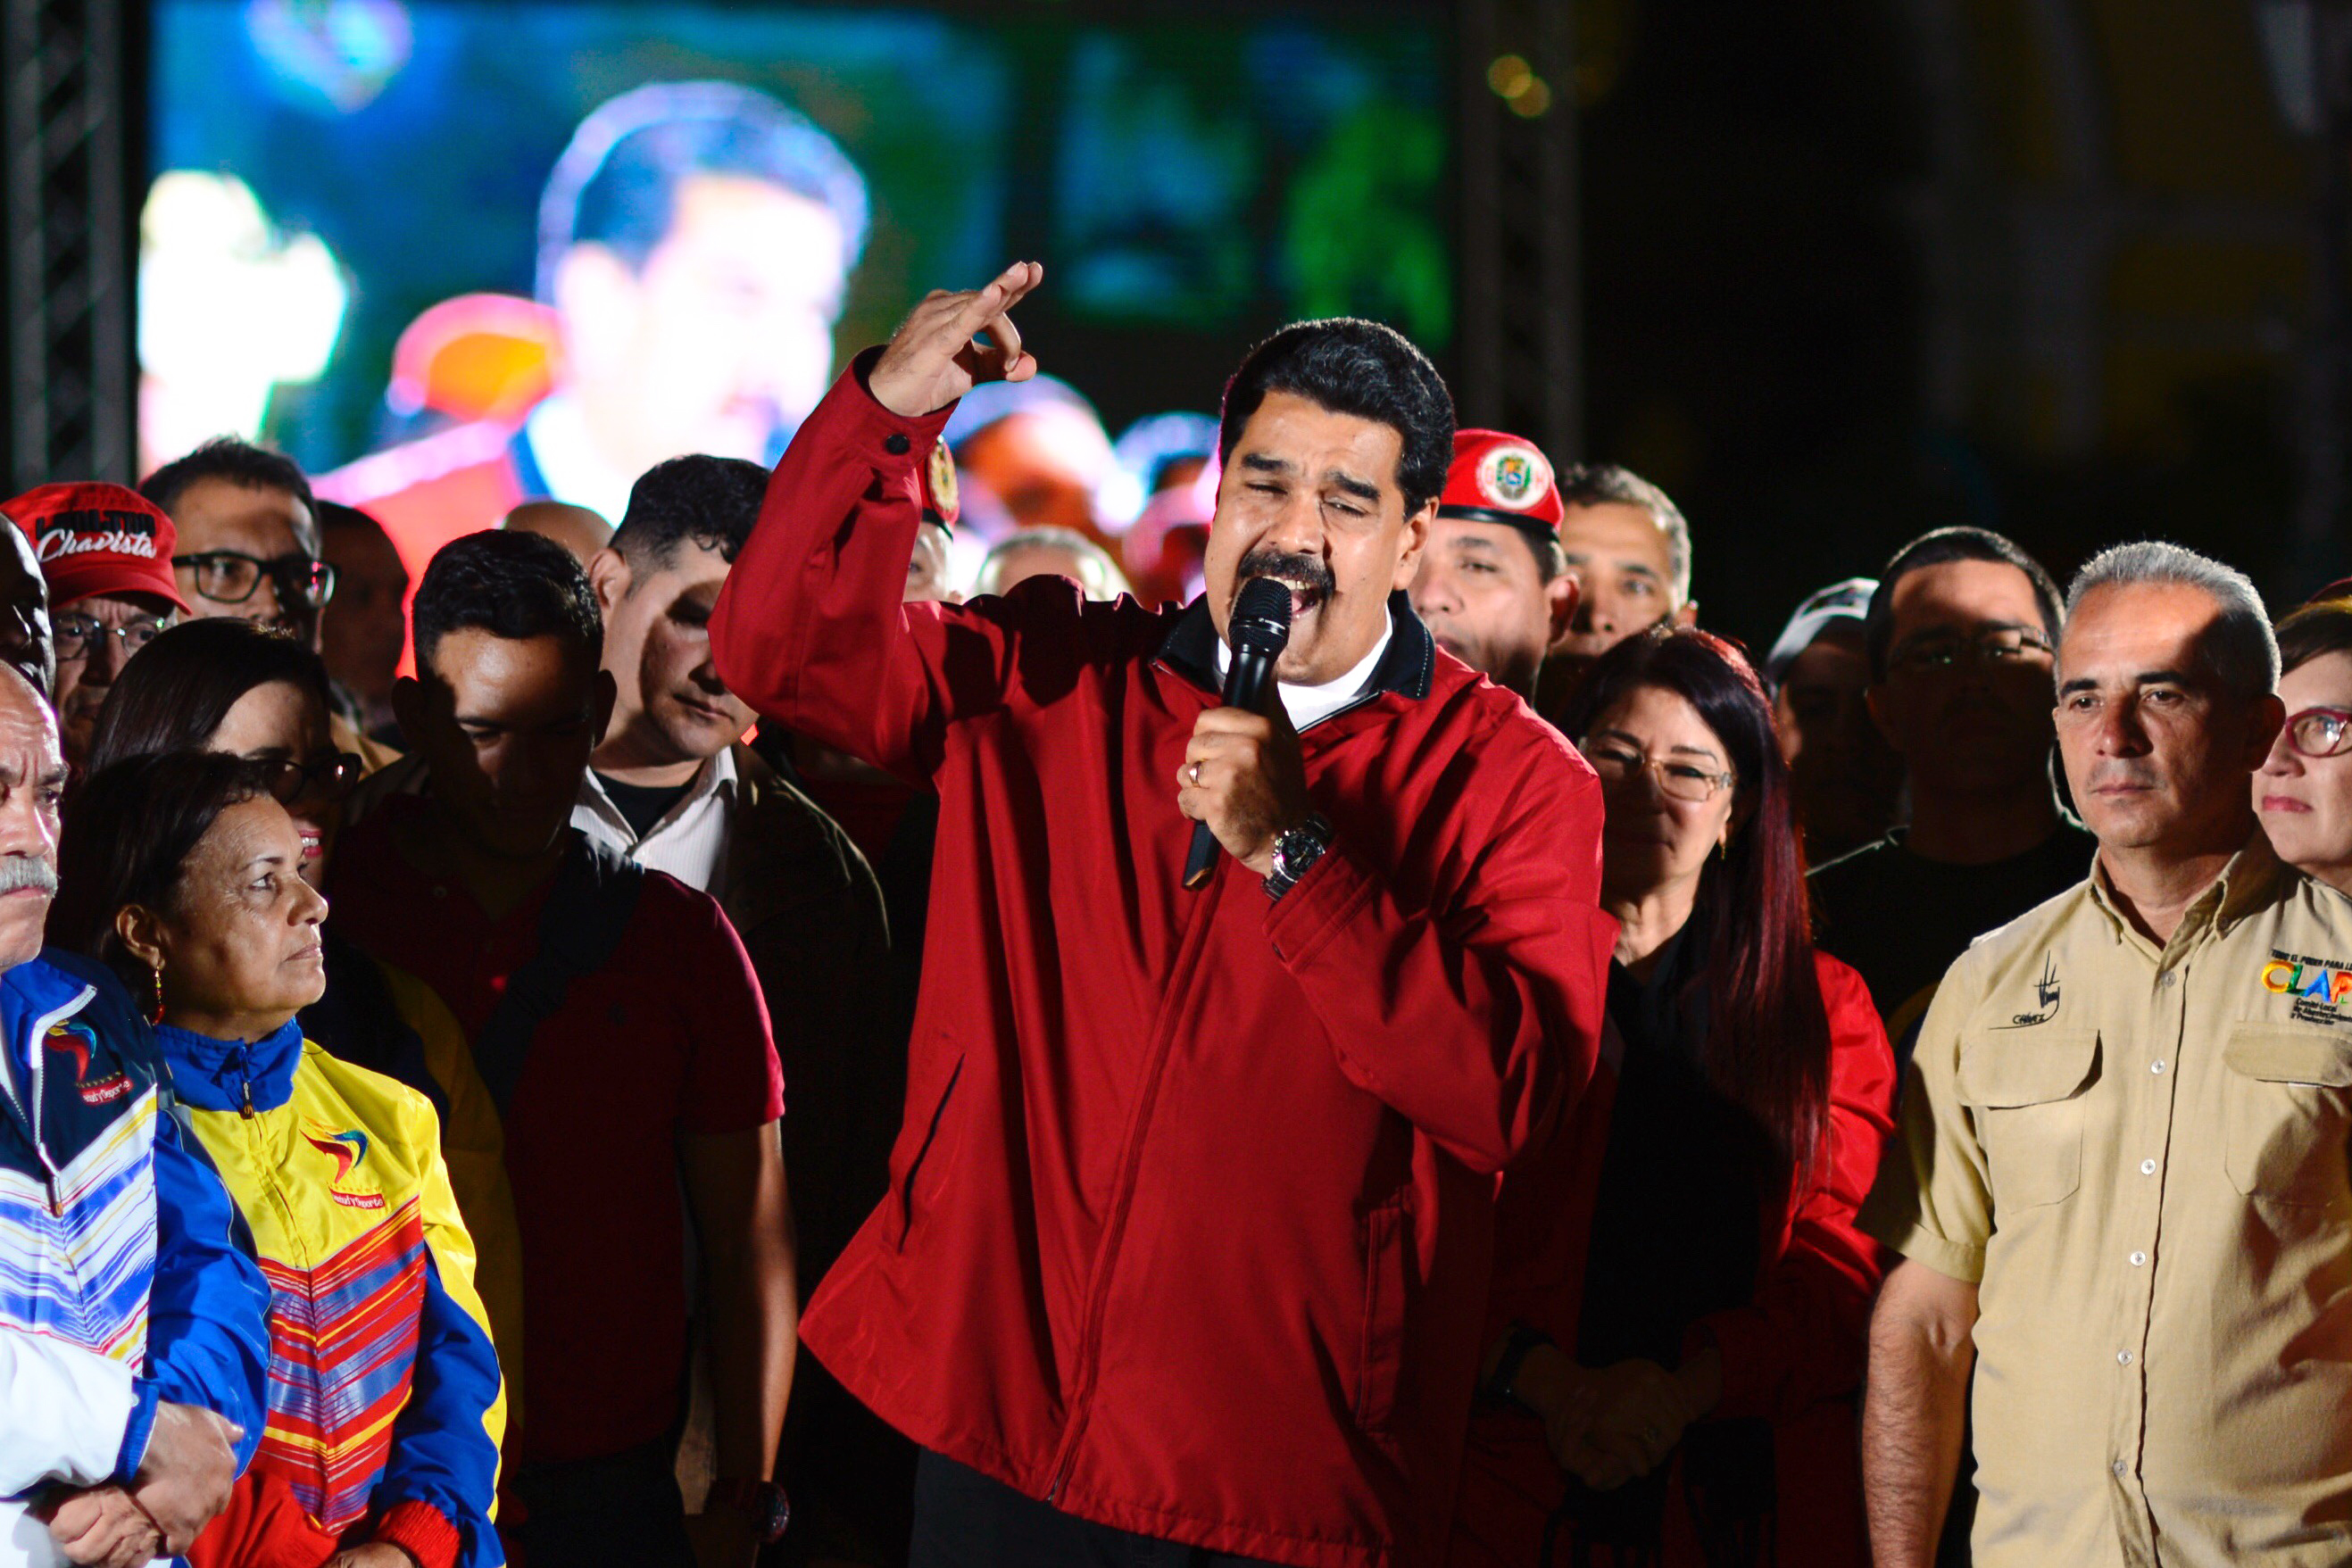 The Venezuelan President Nicolás Maduro (C) speaks next electoral candidates after the first results of the controversial election for a constituent assembly on the Bolivar square in Caracas, Venezuela, 31 July 2017. (picture alliance via Getty Images)